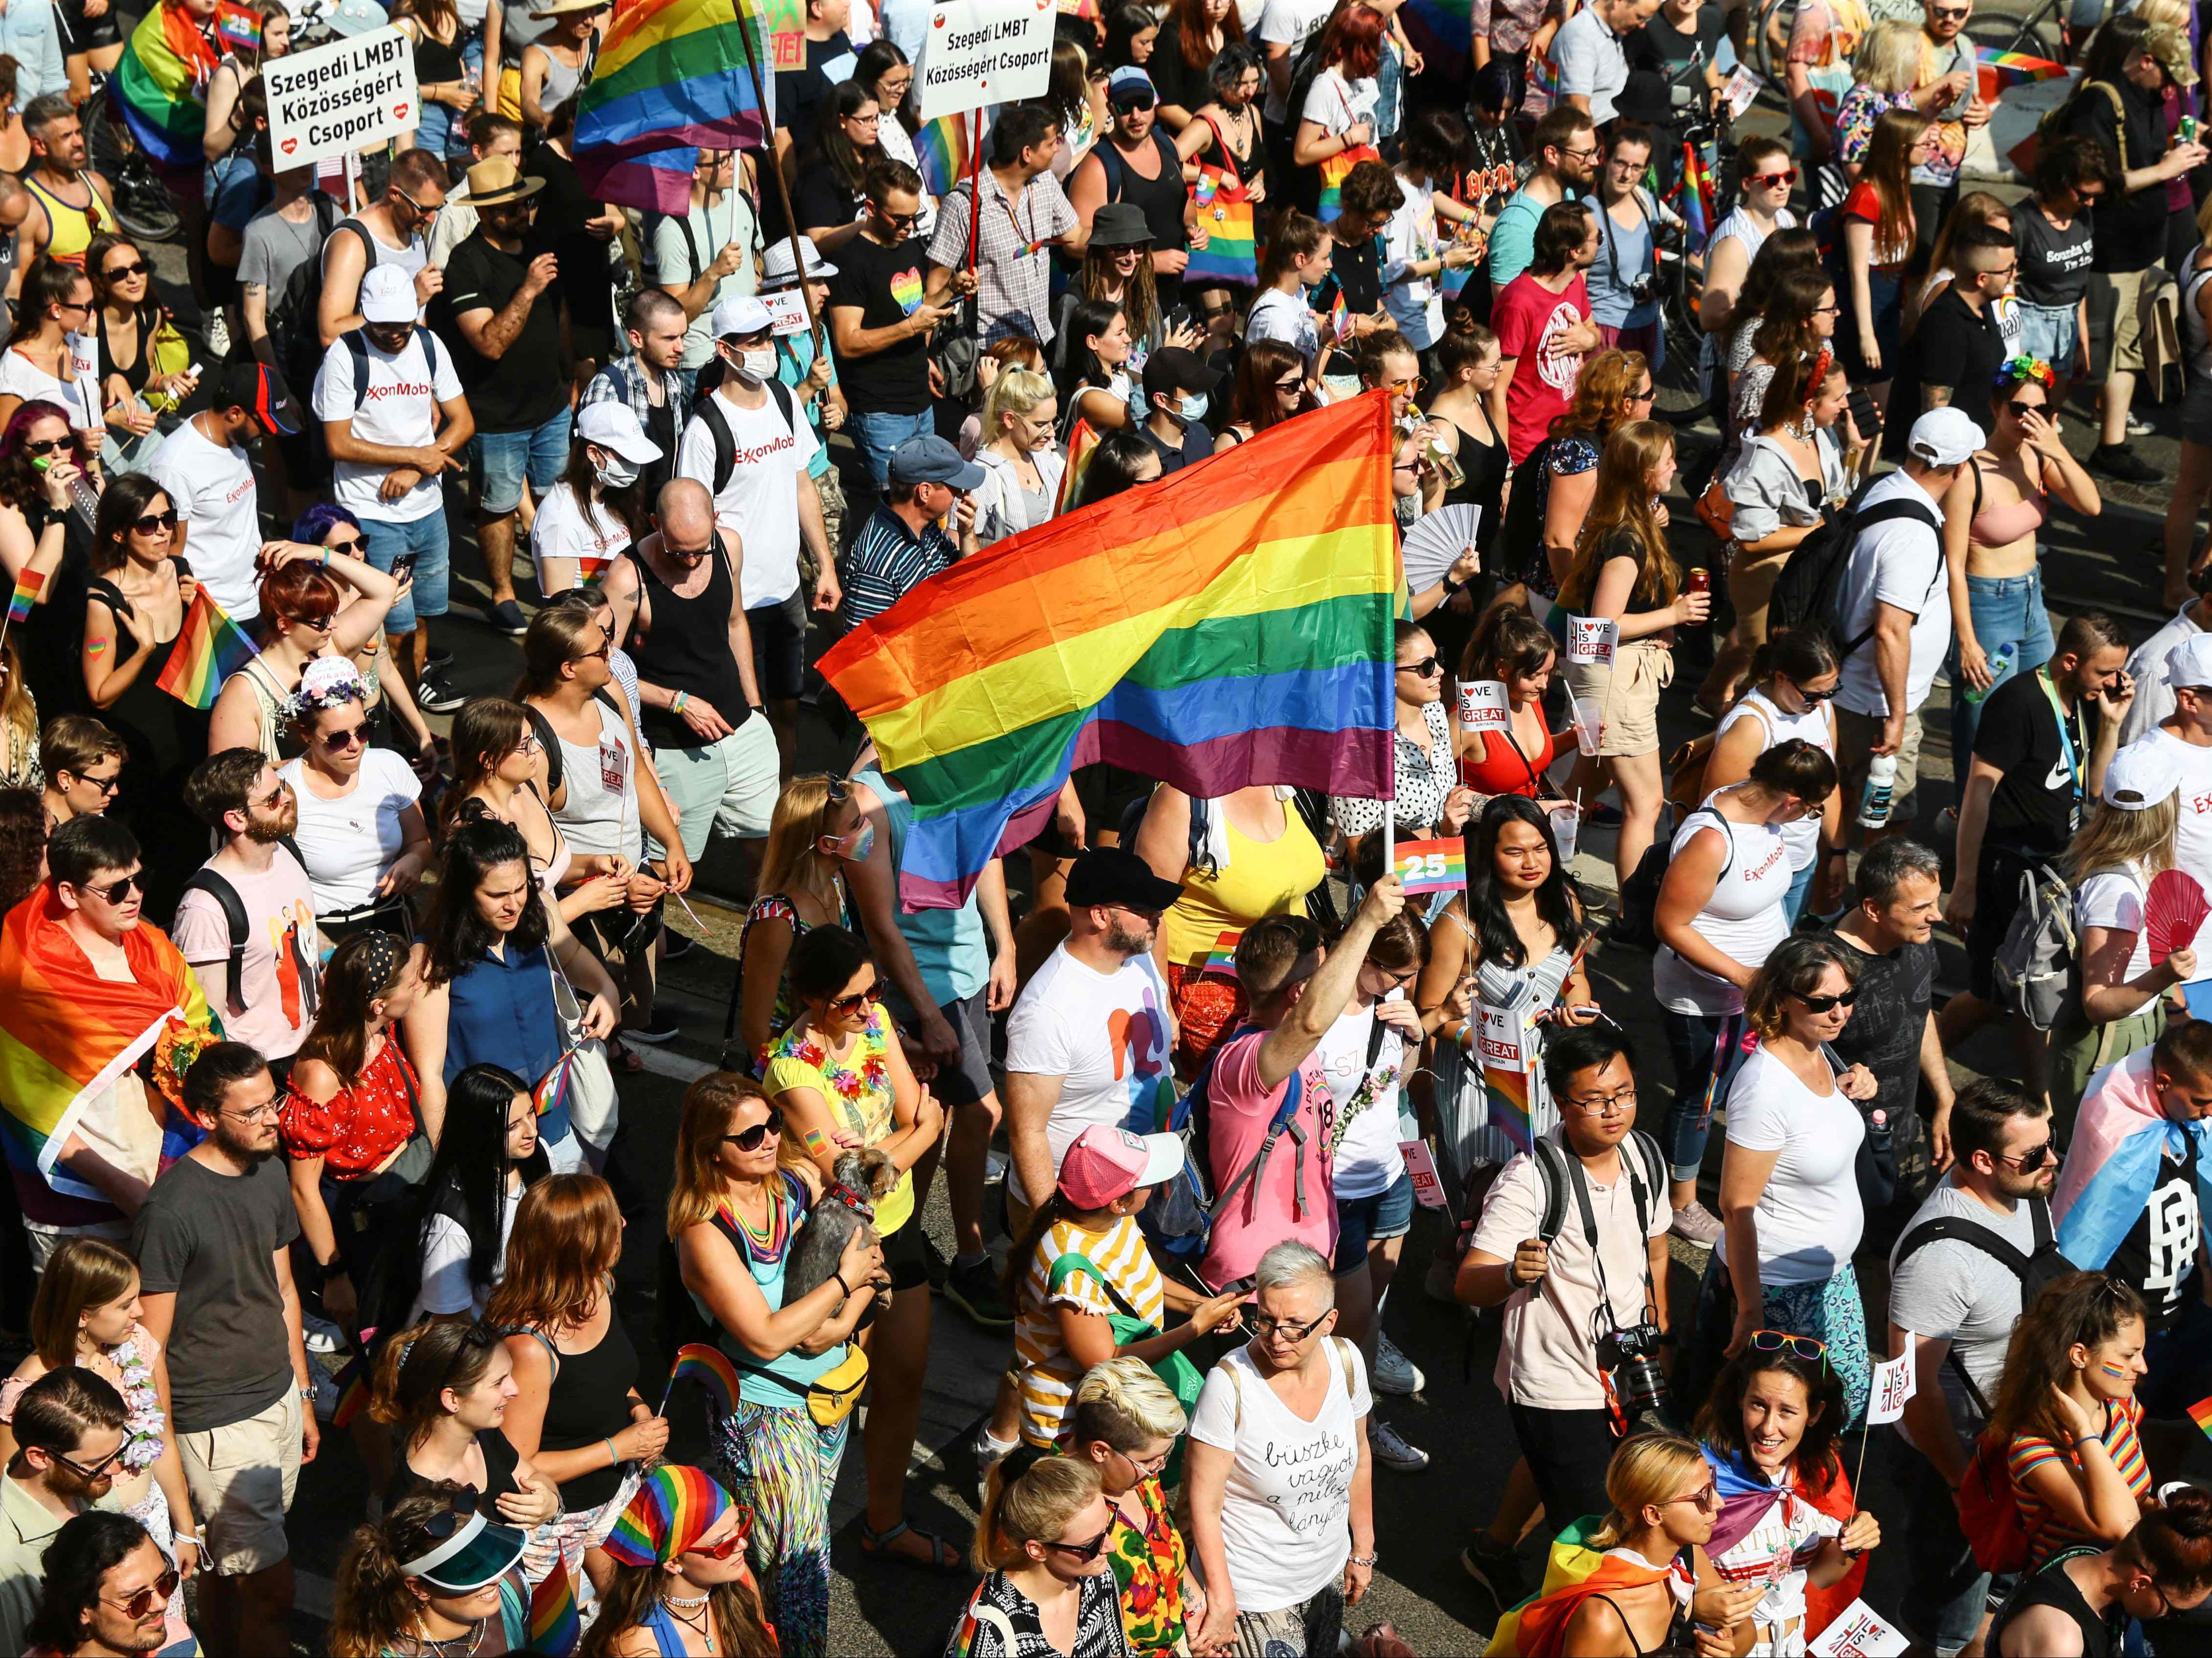 More than 40 embassies and foreign cultural institutions in Hungary issued a statement backing the Budapest Pride Festival